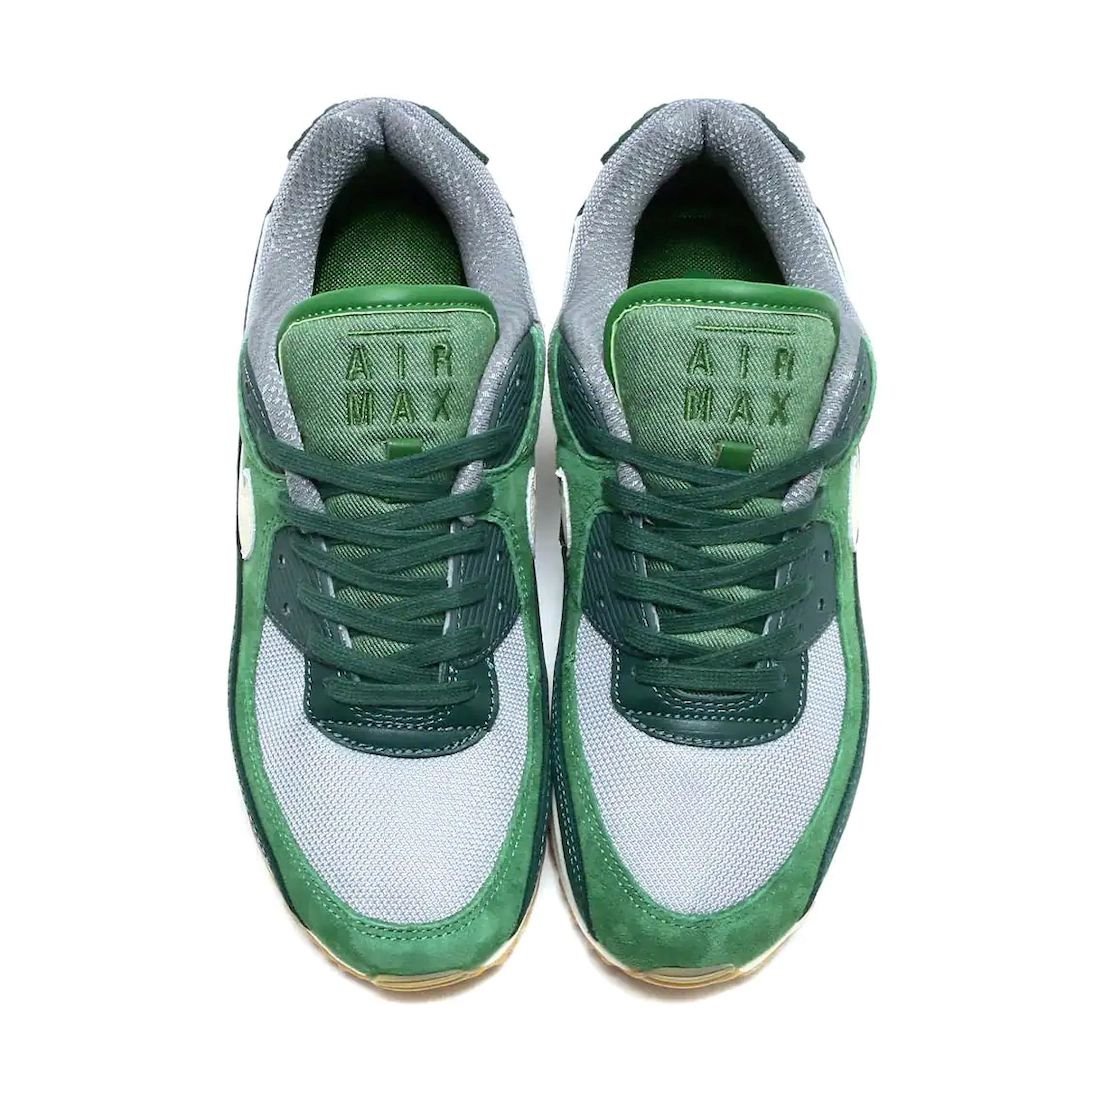 Nike Air Max 90 Pro Green Pale Ivory Forest Green DH4621-300 Release Date Info